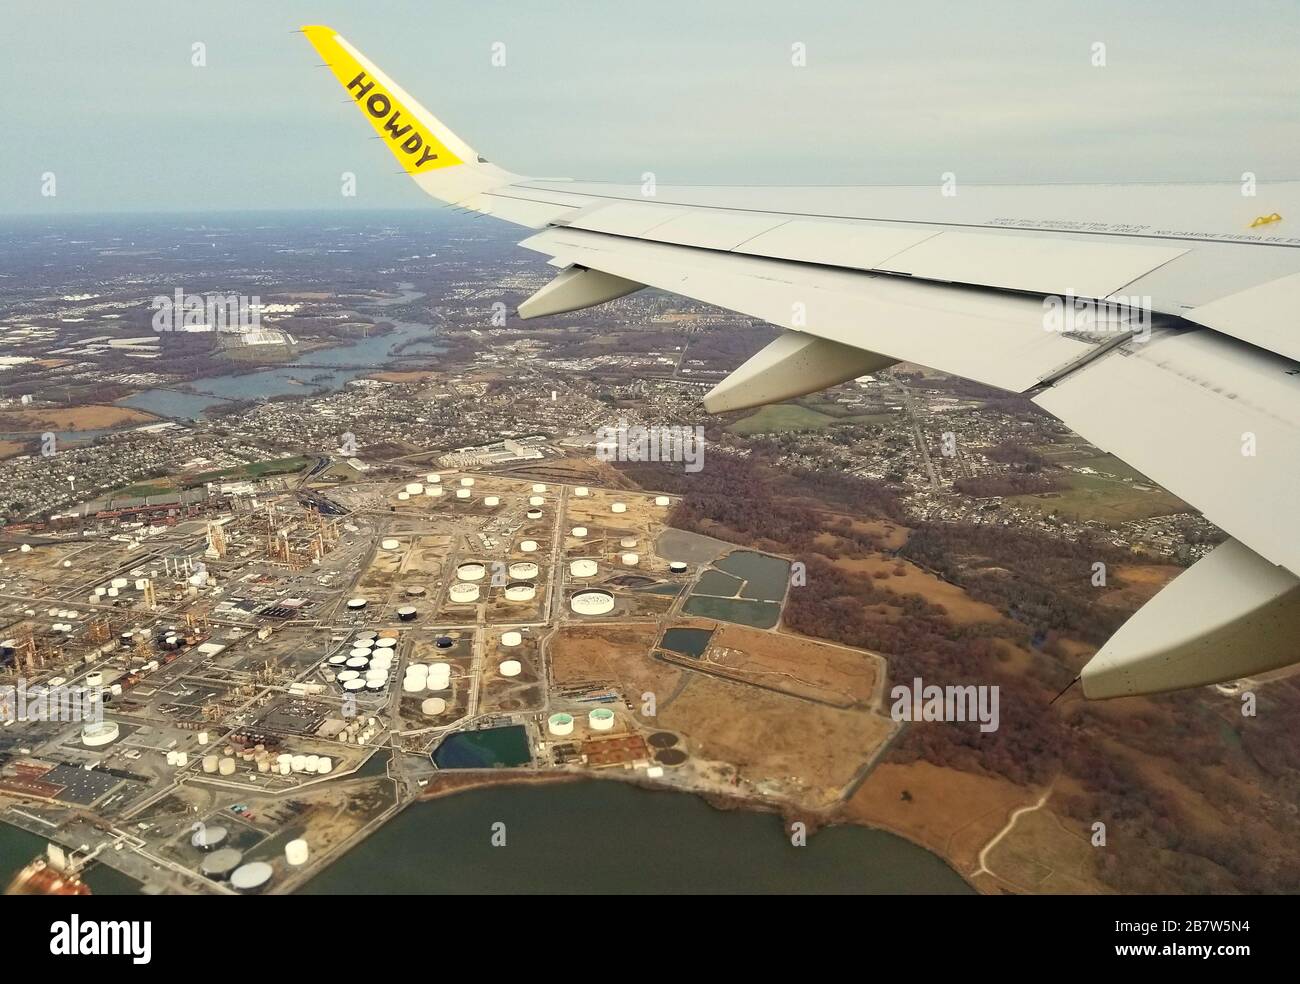 Philadelphia, Pennsylvania, U.S.A - March 13, 2020 - The view of the industrial area from the window of a Spirit Airlines plane Stock Photo